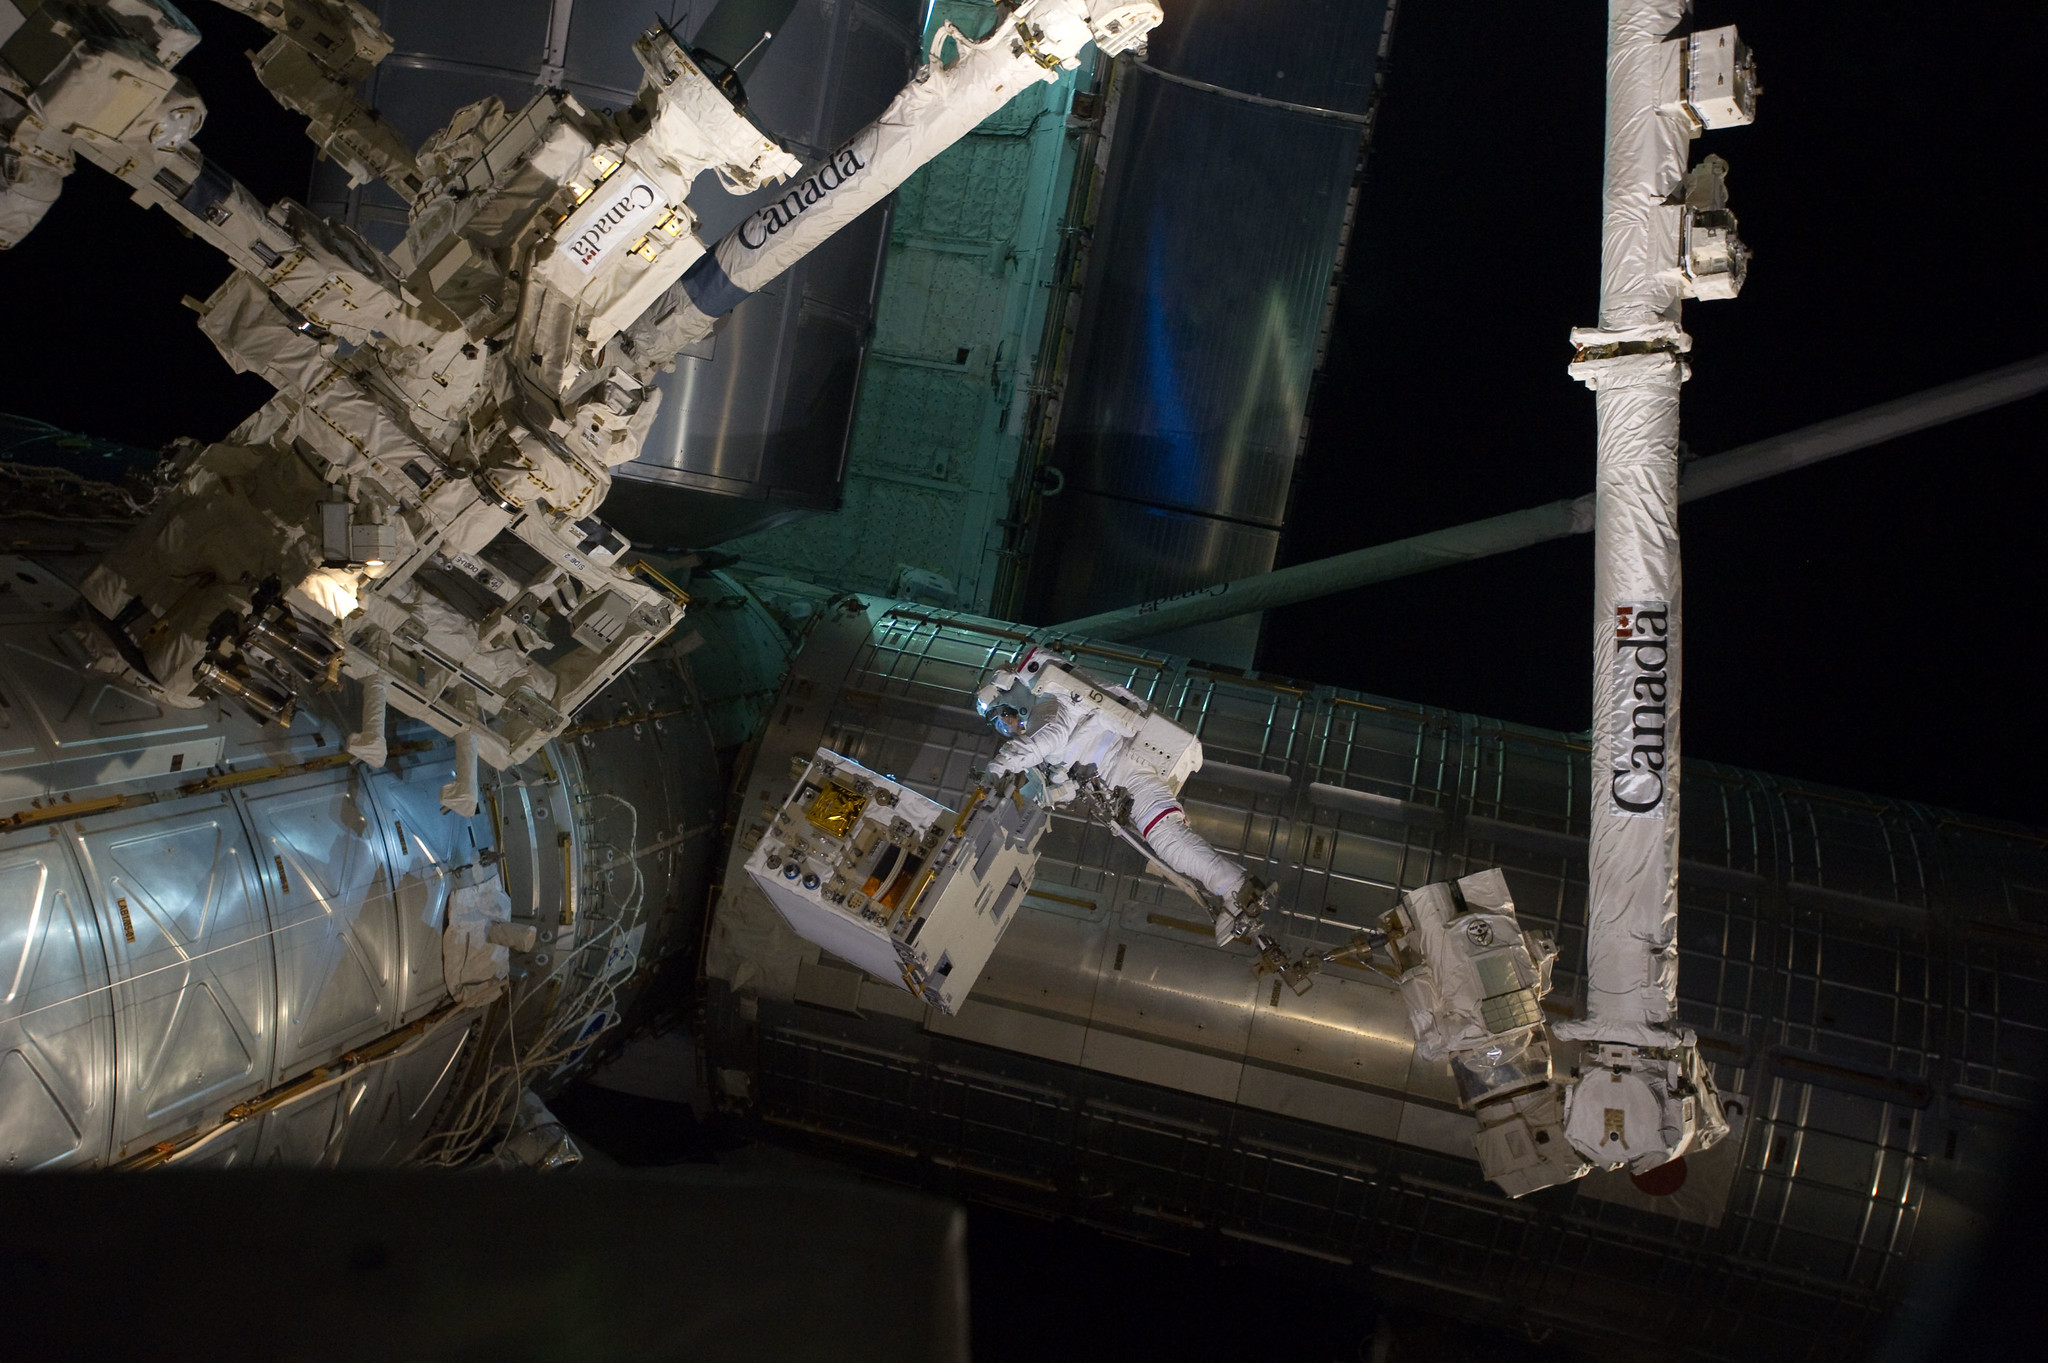 Spacewalking astronauts successfully transferred the RRM module from the Atlantis shuttle cargo bay to an temporary platform on the ISS's Dextre robot.